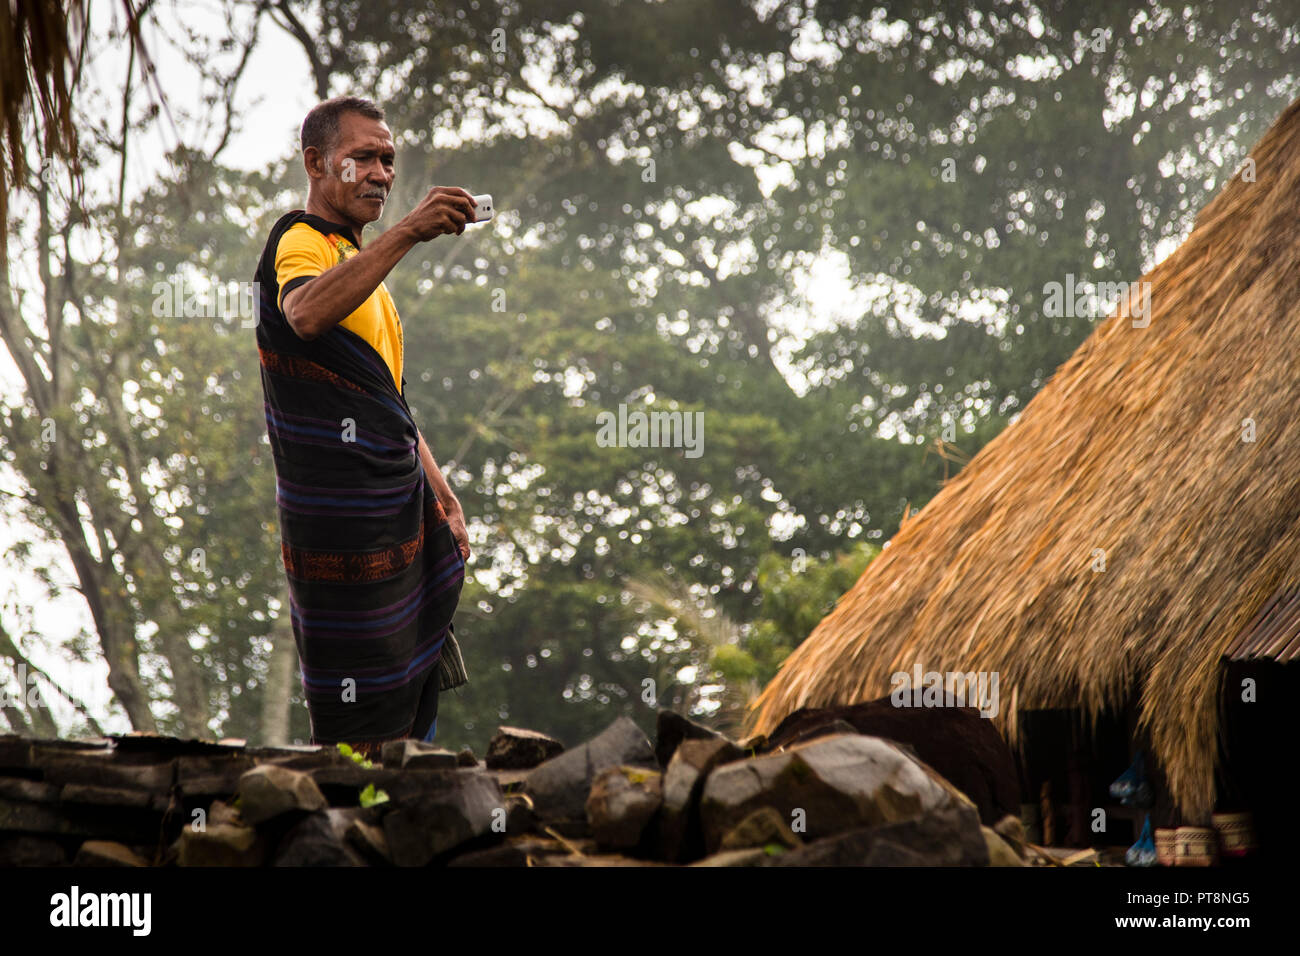 Indonesian Man in traditional outfit over t-shirt shooting photos with cellphone Stock Photo